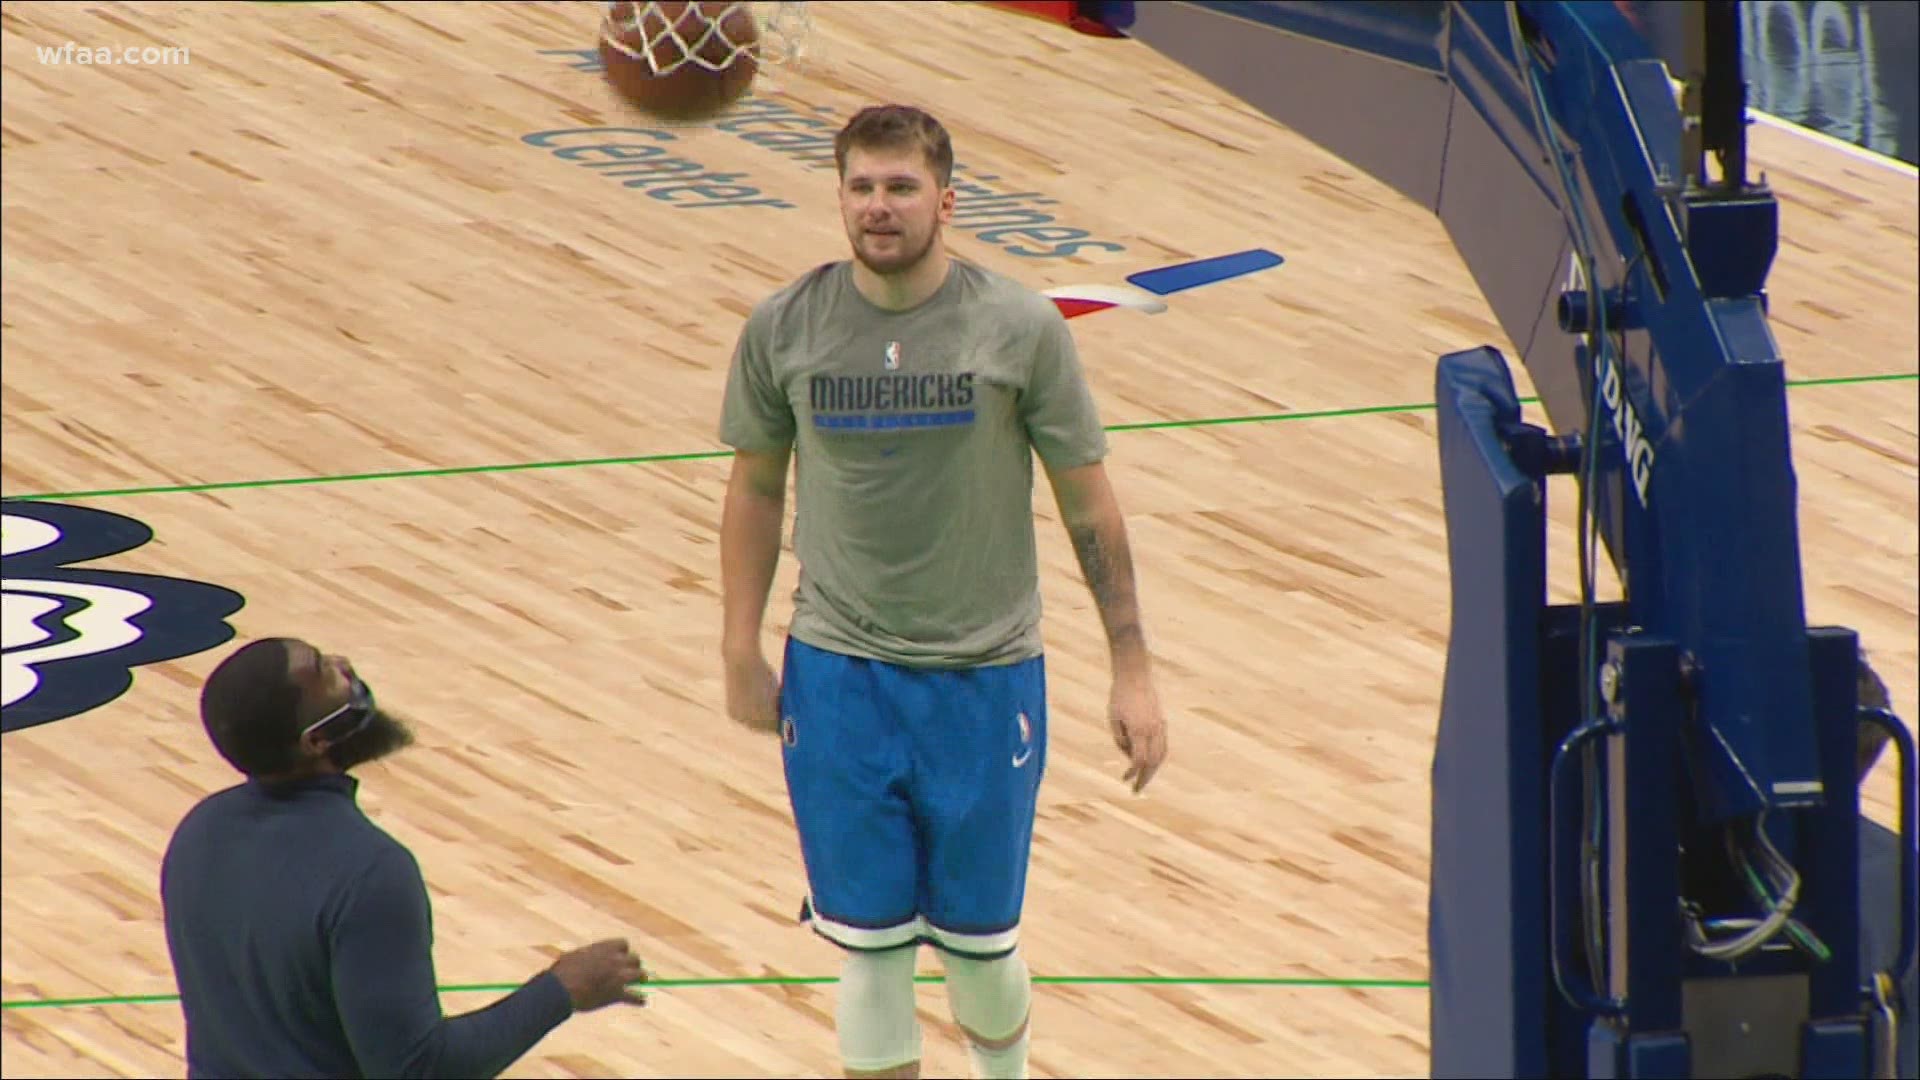 Luka Doncic could've looked at his 12-point performance, chalked it up to one bad night, and said no big deal. Instead, he came out postgame and grinded.